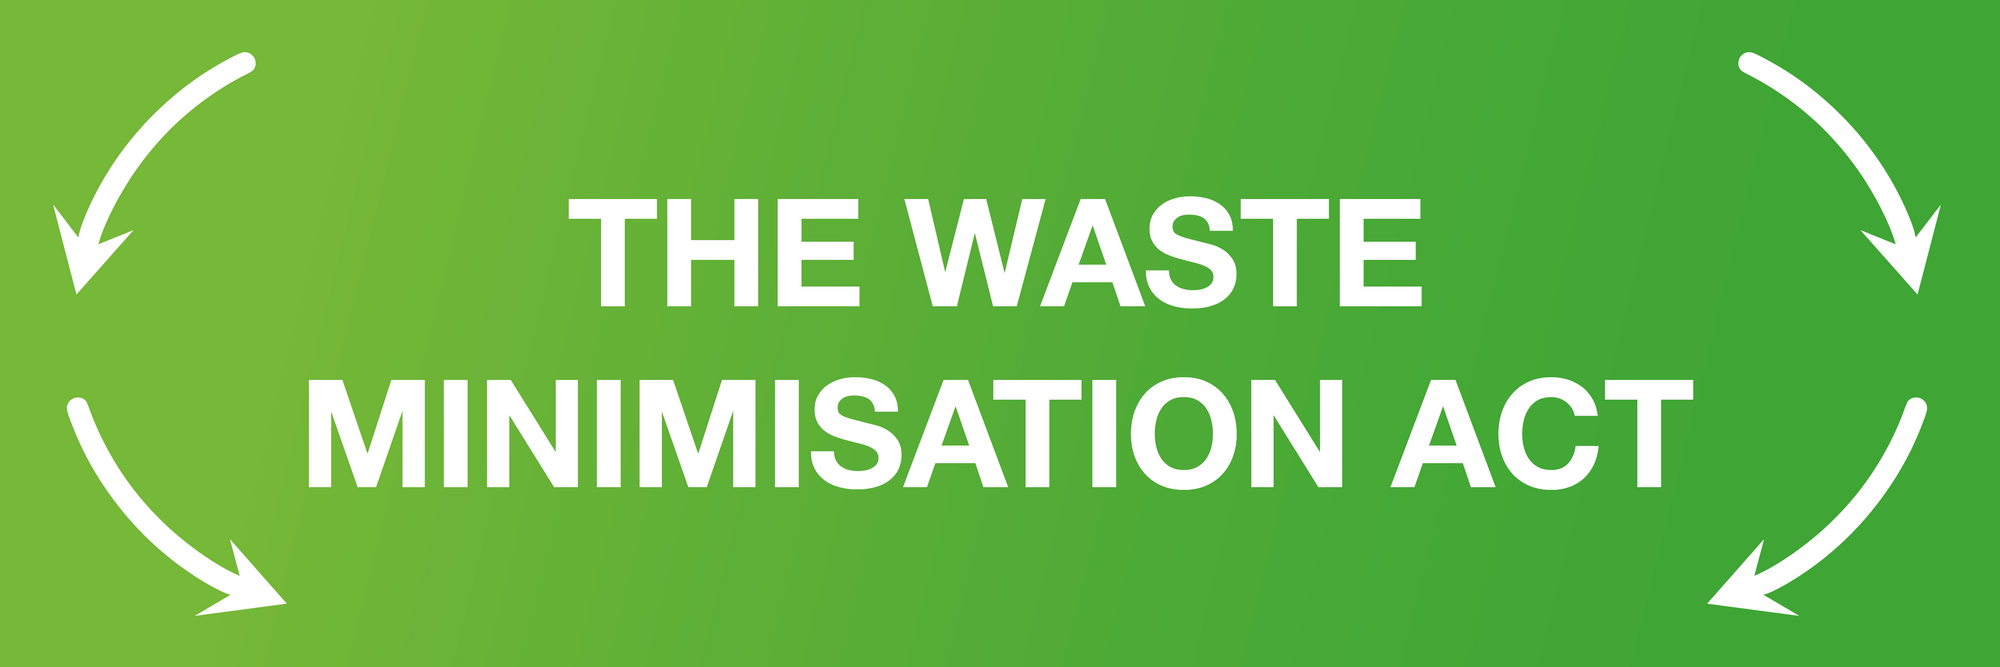 What is the Waste Minimization Act?